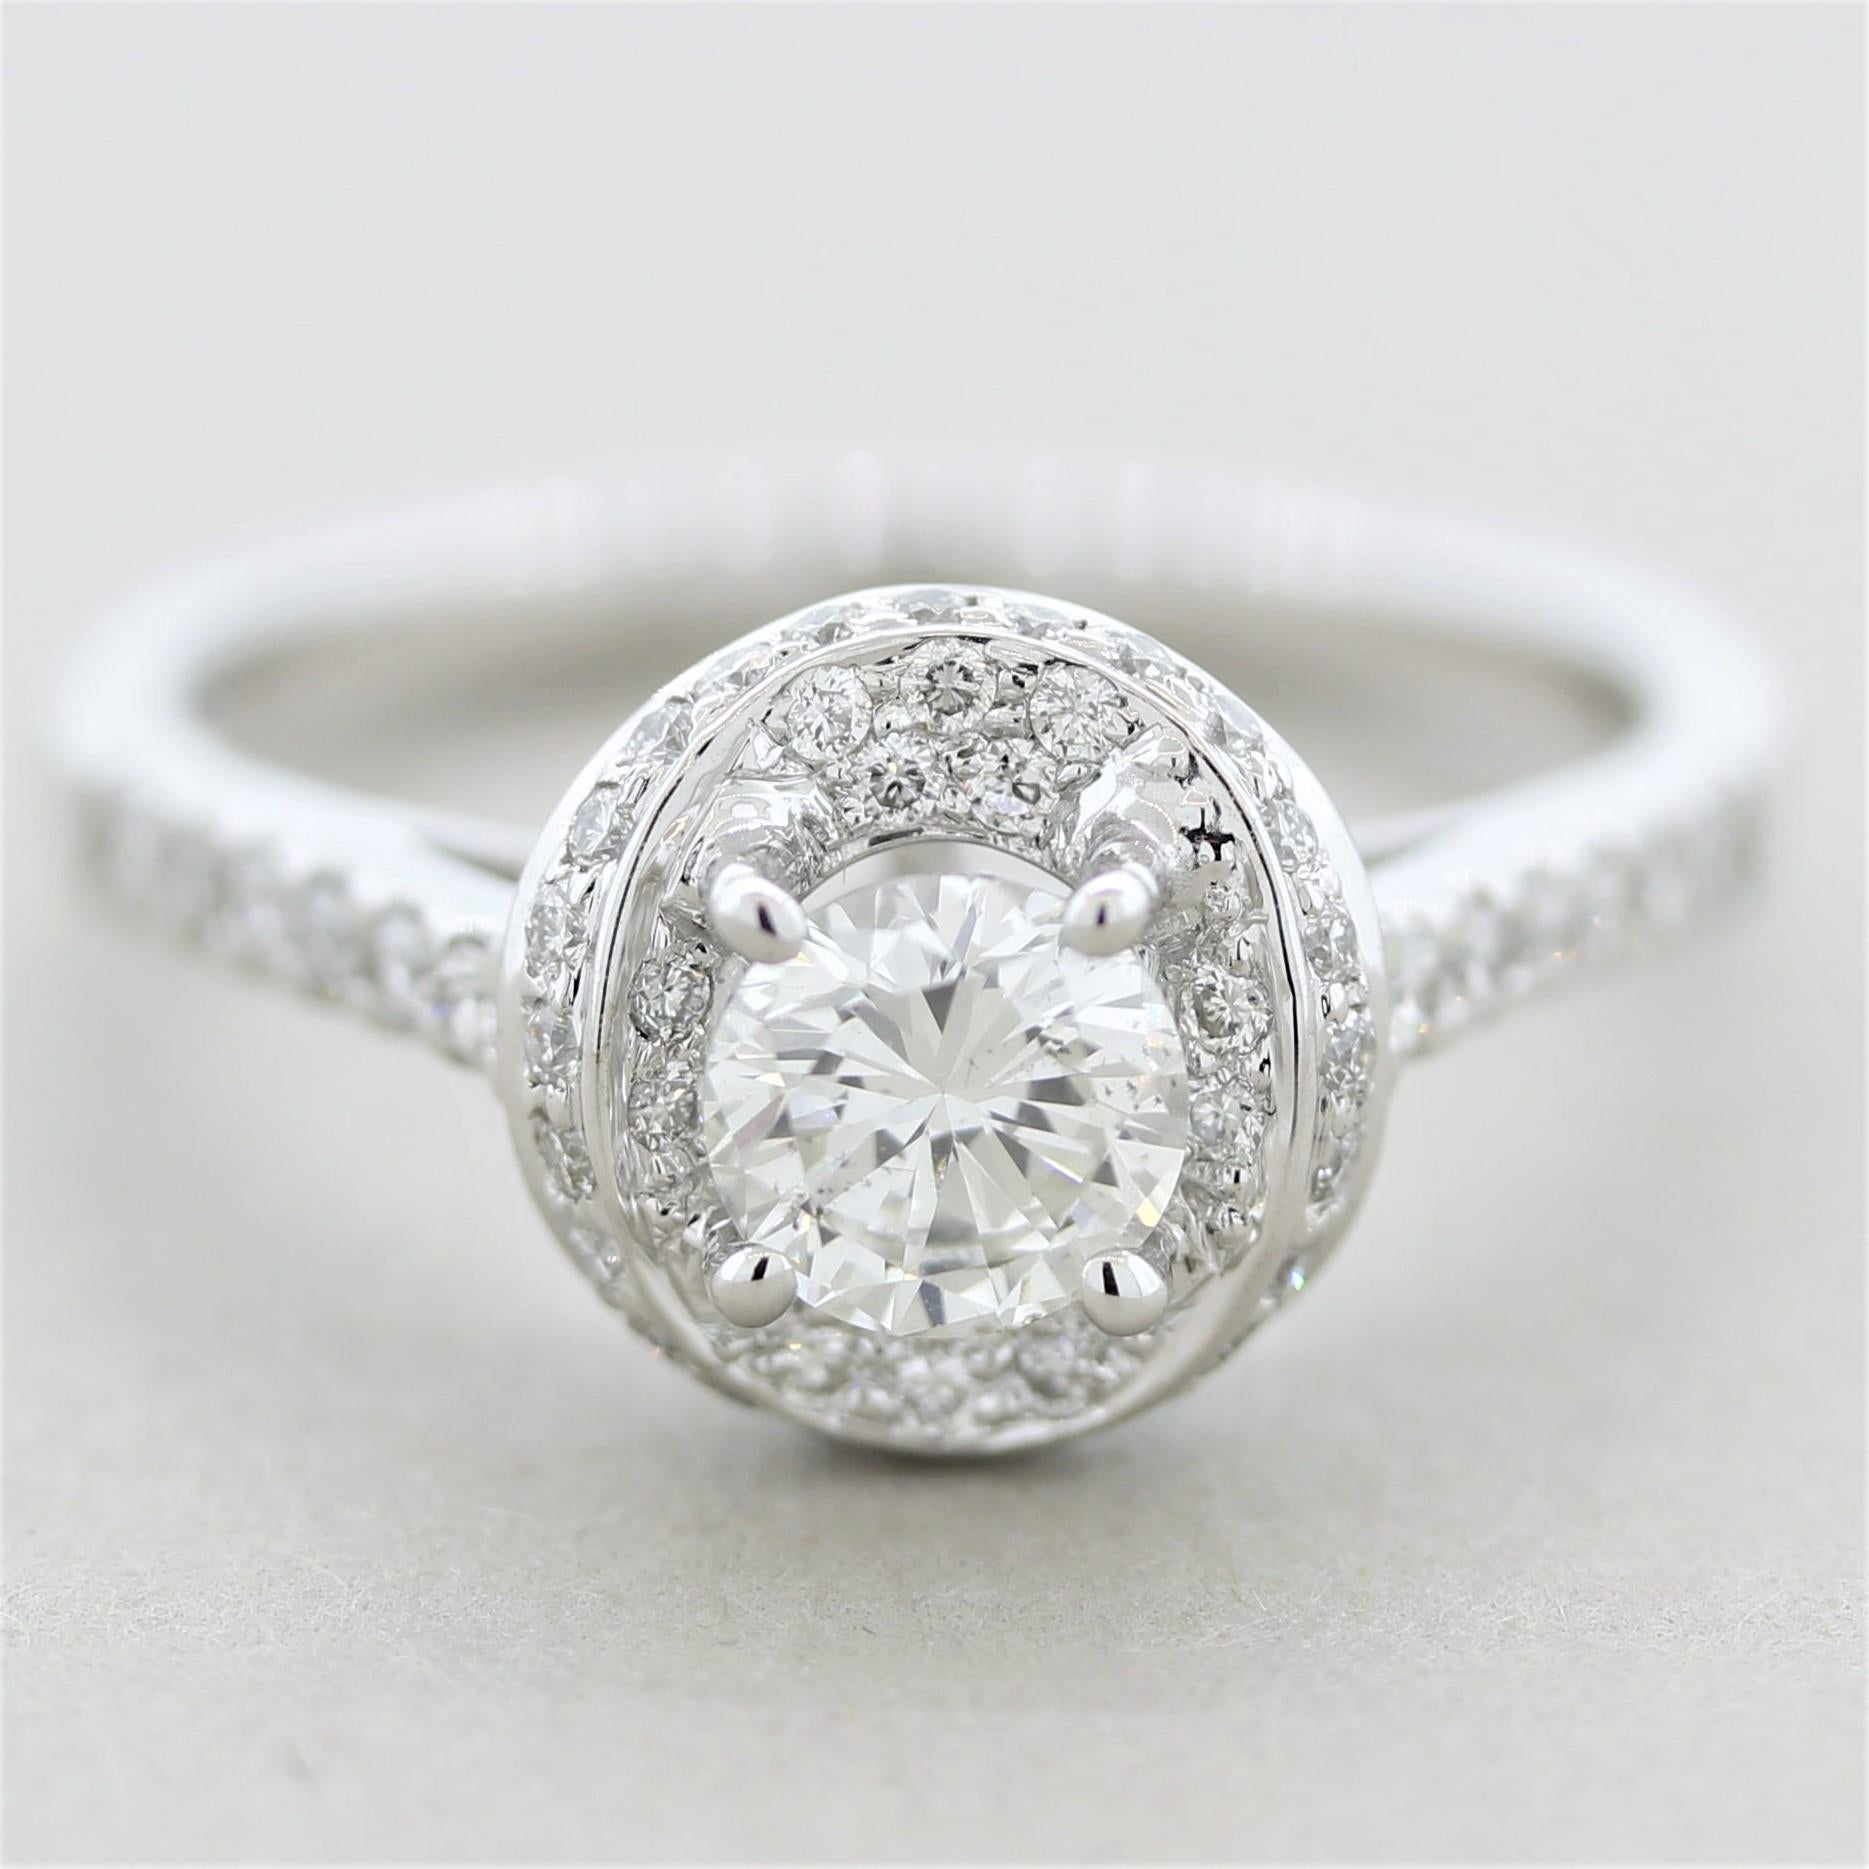 A simple yet elegant diamond engagement ring featuring a 0.58 carat round brilliant-cut diamond in the center. It is bright and lively with no eye-visible inclusions and great color. It is accented by an additional 0.37 carats of round diamonds